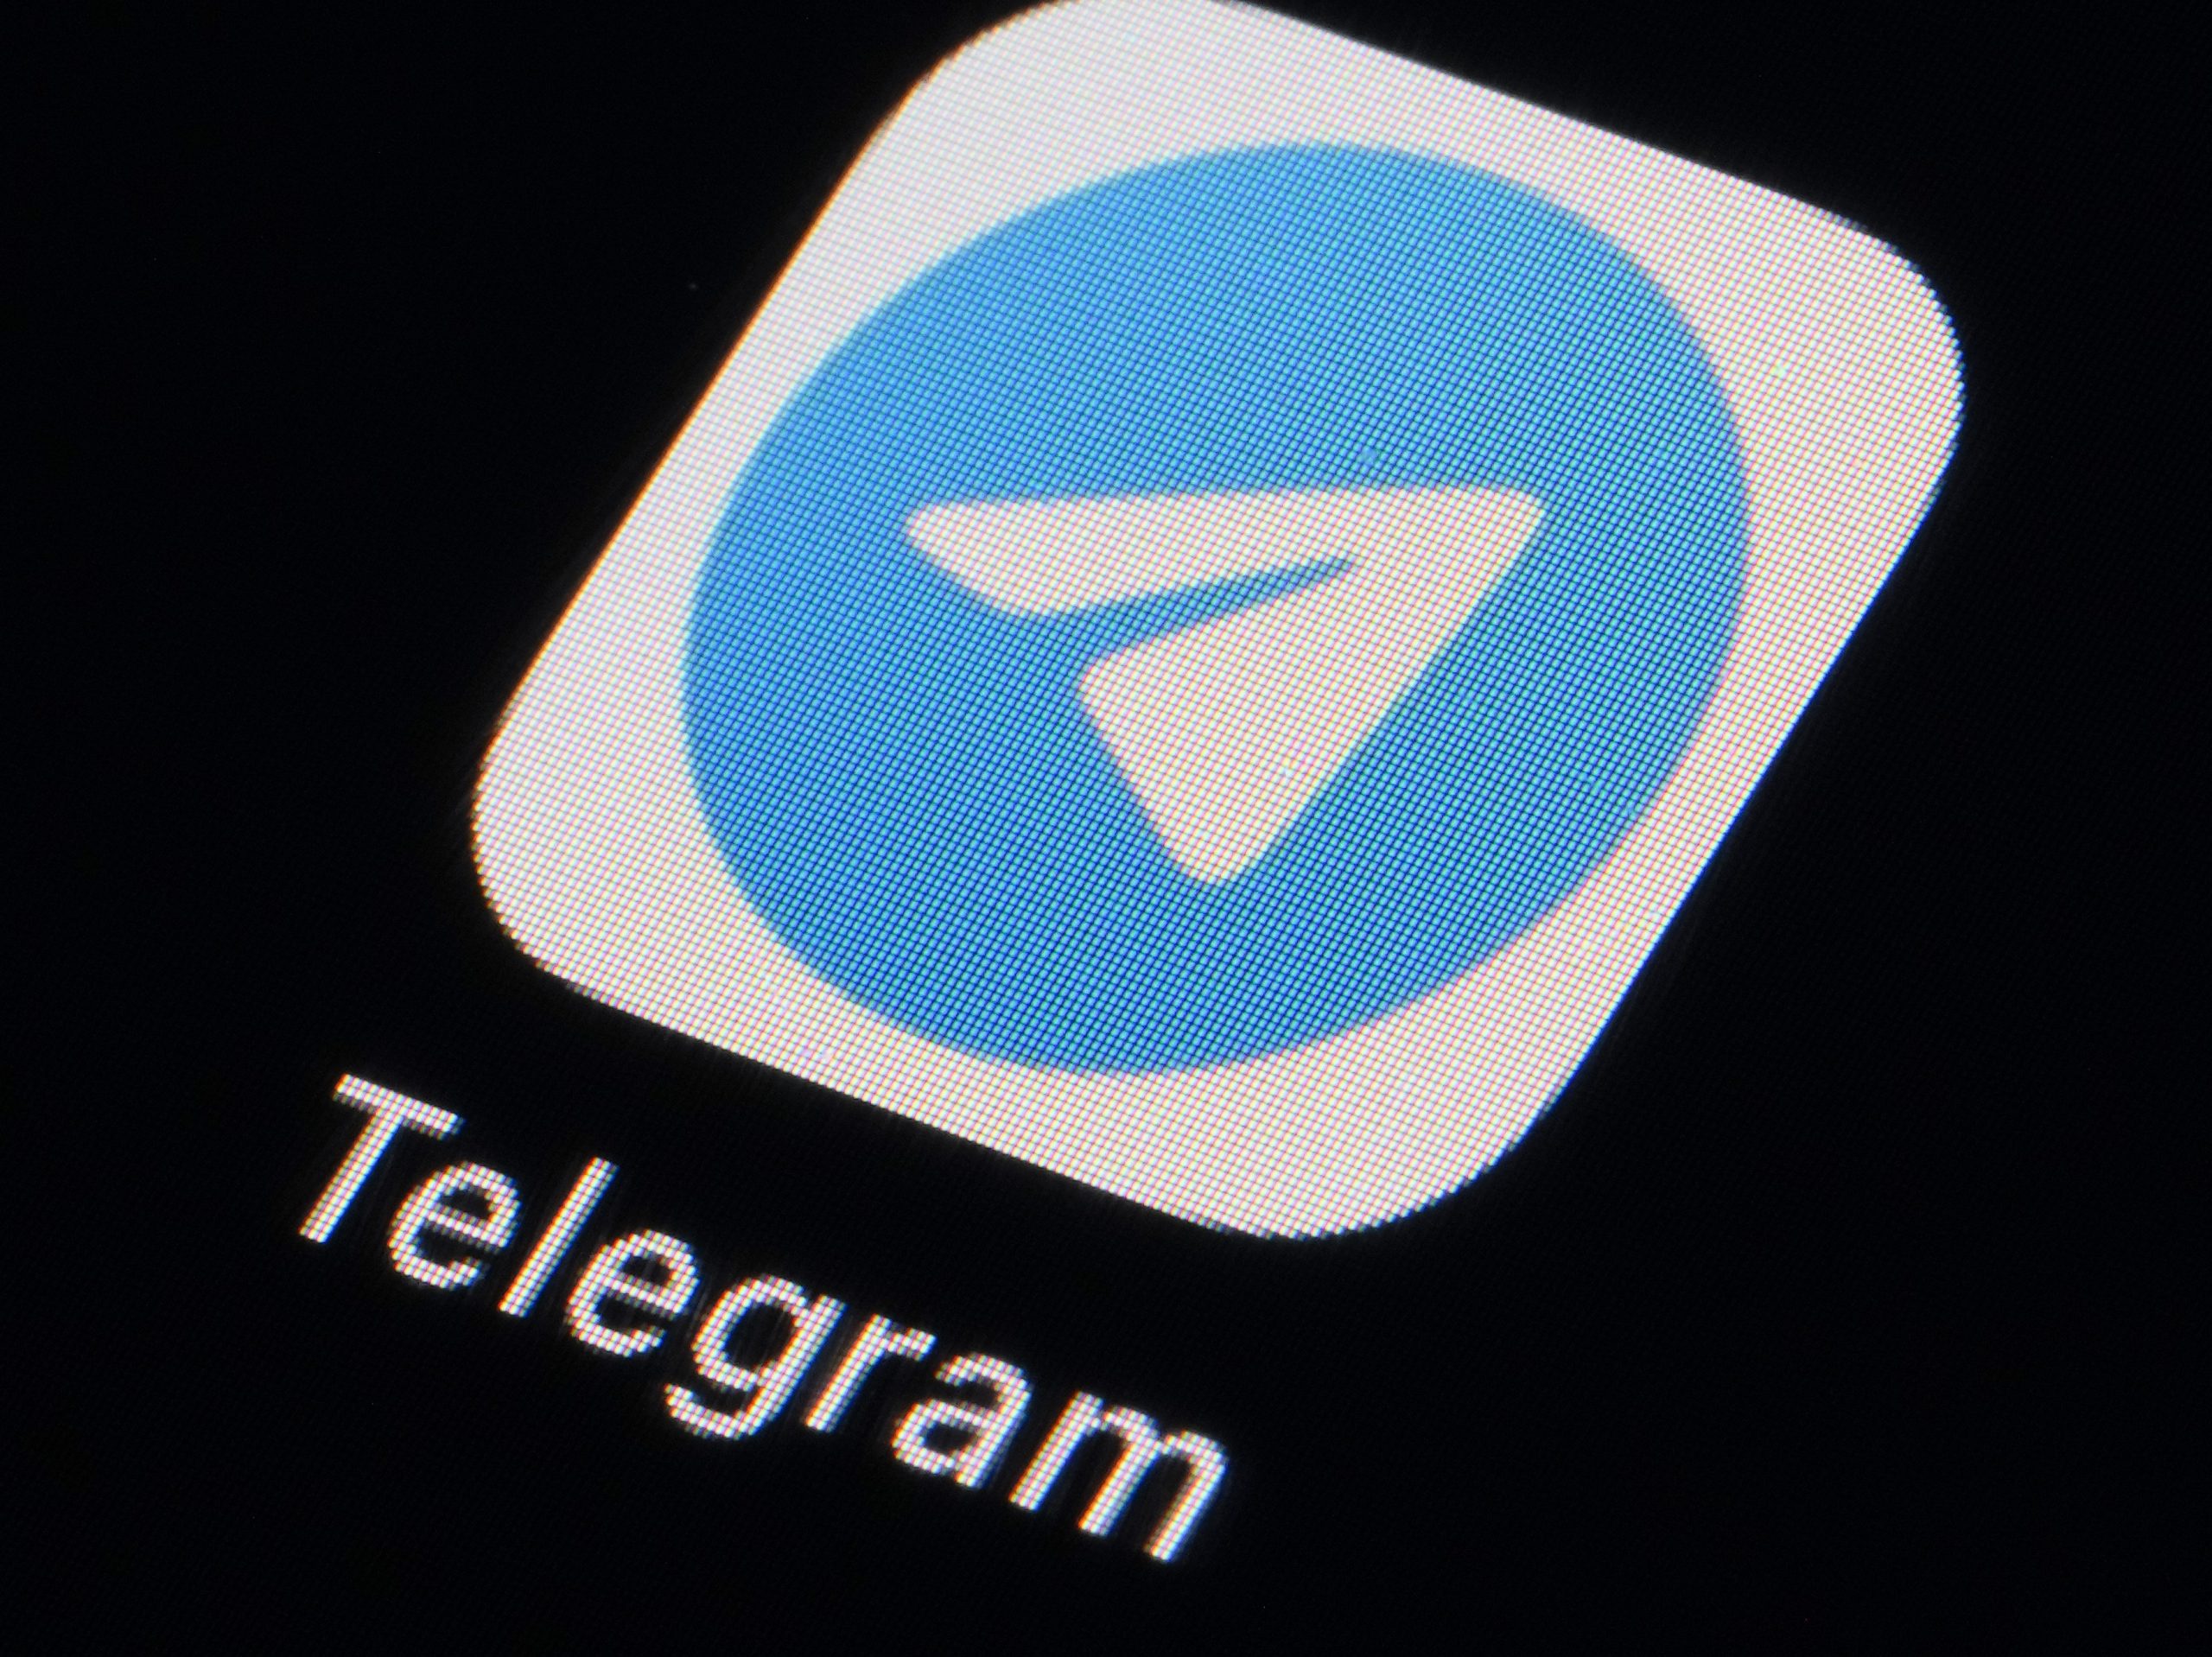 Doing these transactions has a very low cost and Telegram's TON network charges only about $0.10.